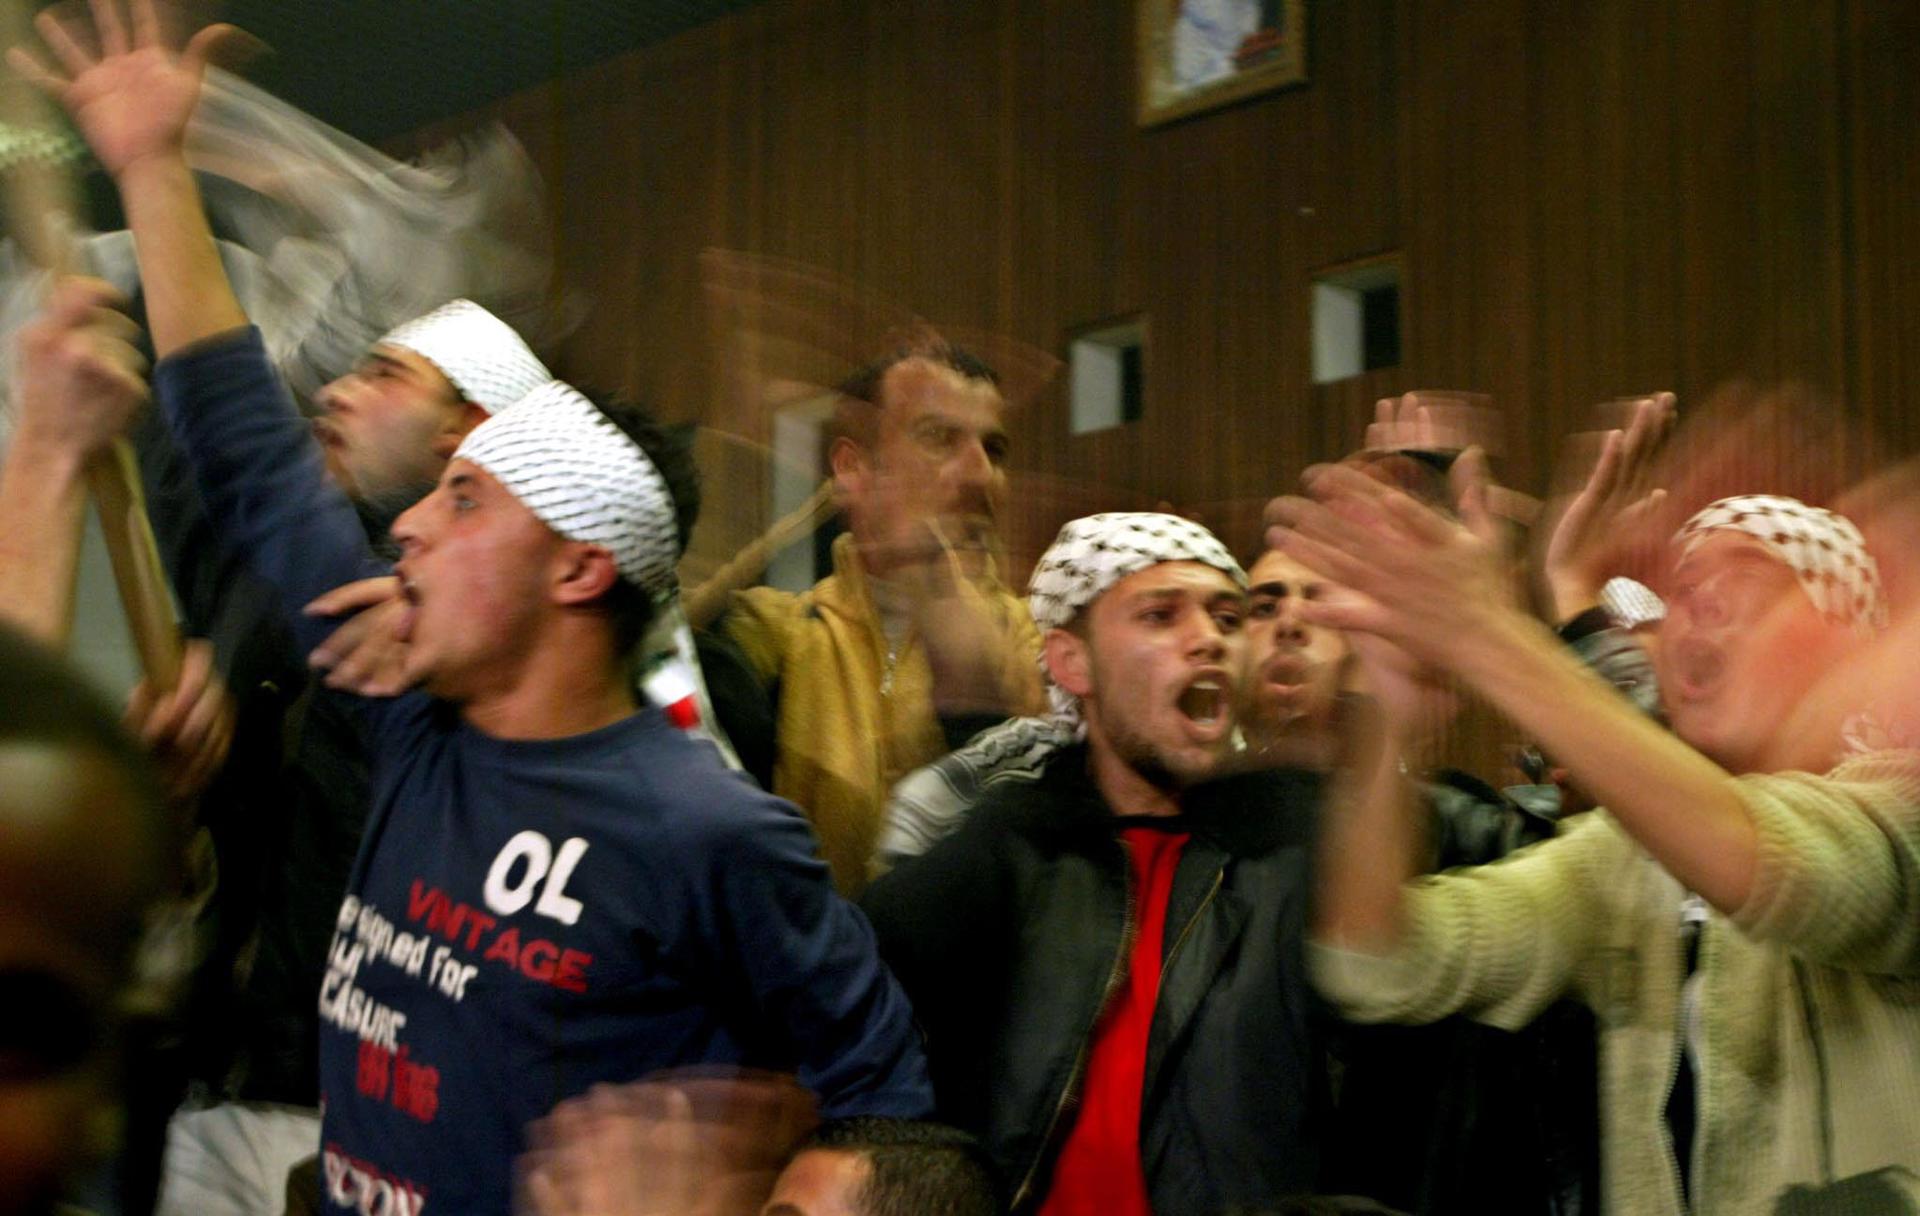 epa000334606 Palestinian supporters of Palestinian Liberation Organisation chairman Mahmoud Abbas shouting during a rally in Gaza City, 23 December 2004. Over 140,000 Palestinians were slated to cast ballots Thursday in municipal elections in 25 West Bank towns andvillages, in what Palestine Liberation Organization chief MahmudAbbas said was "part of a comprehensive national plan to renew the legitimacy" of the Palestine Authority. EPA/Ali Ali